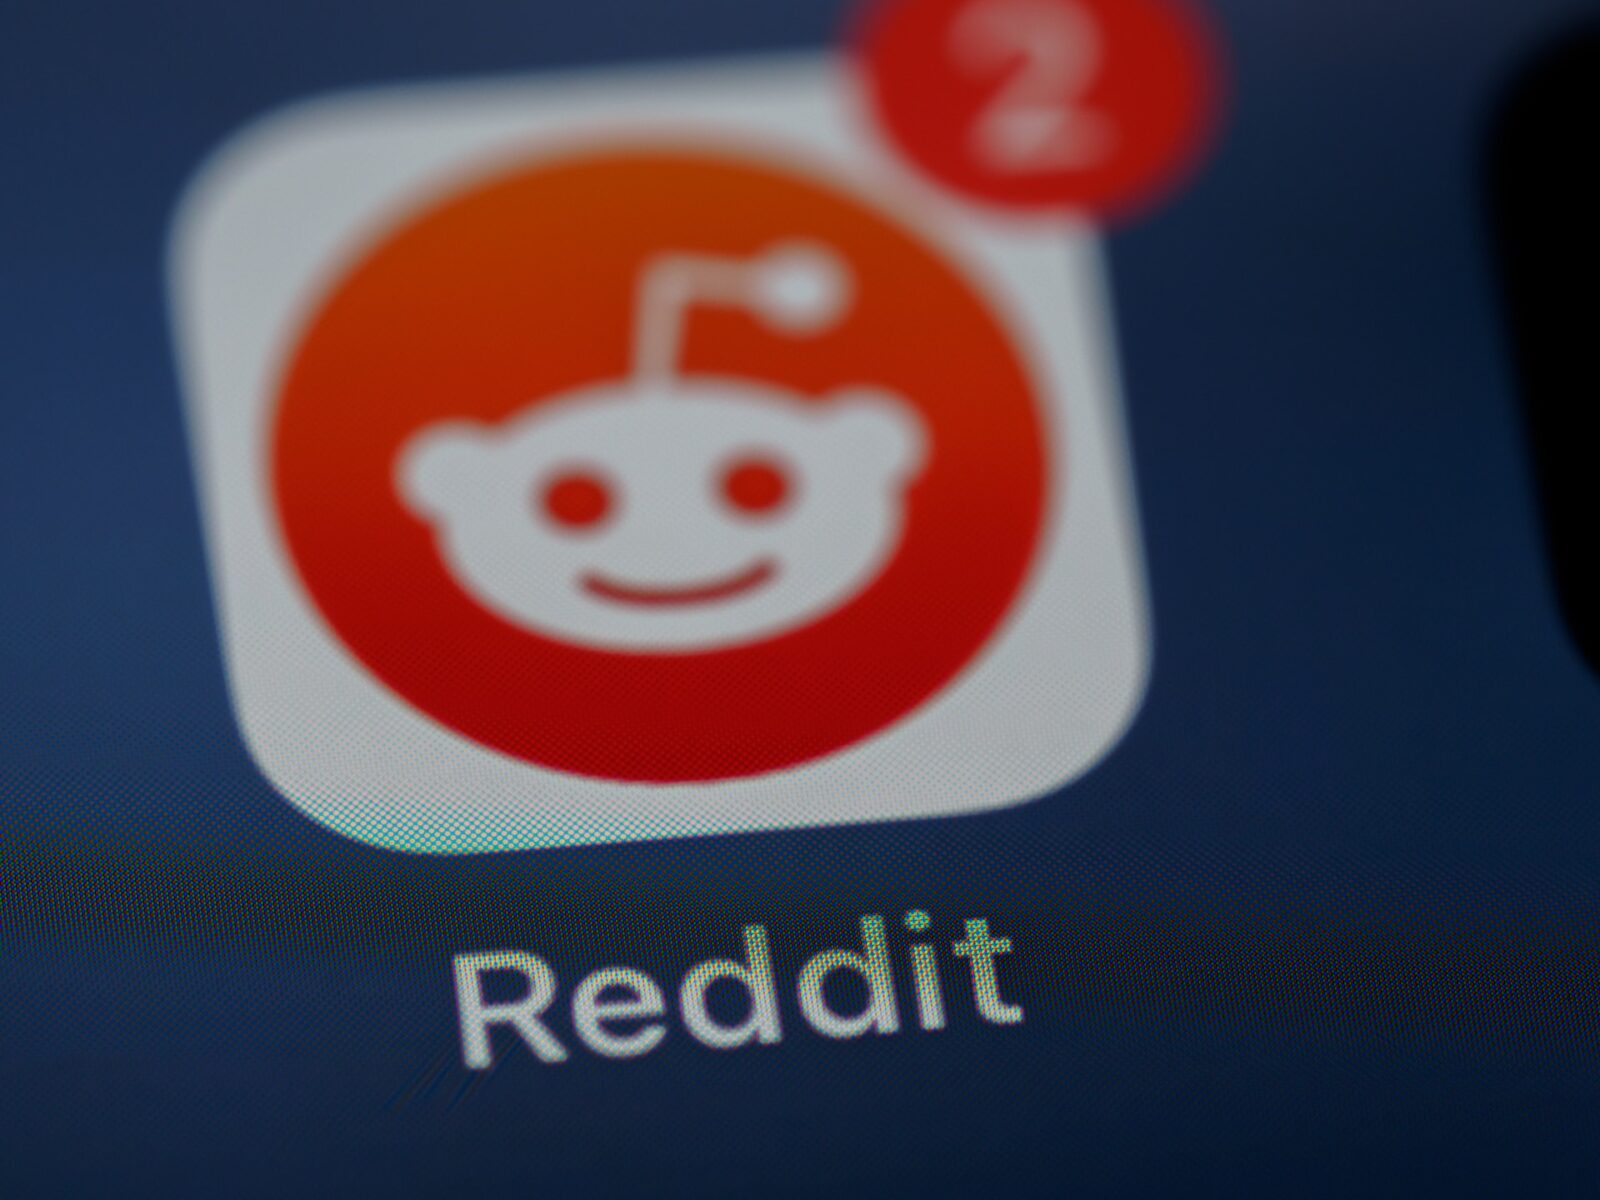 The Evolution of Reddit: From a Simple Discussion Platform to a Social Media Giant